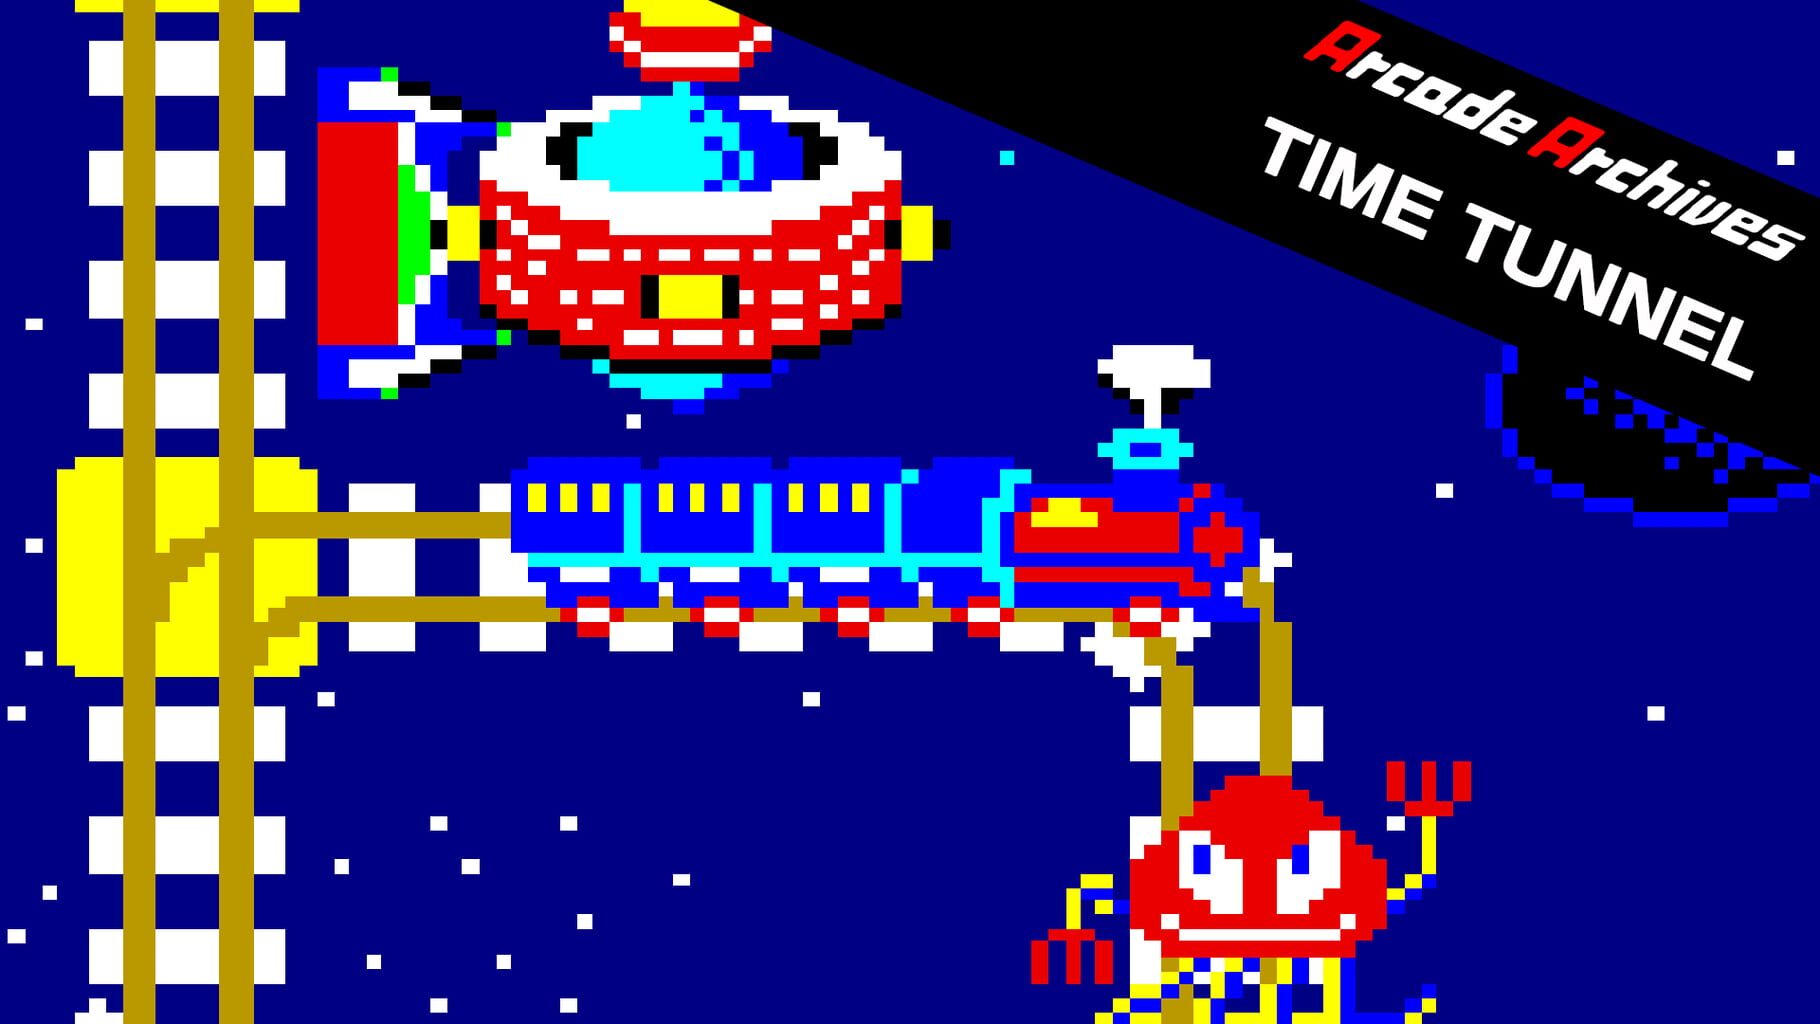 Arcade Archives: Time Tunnel artwork